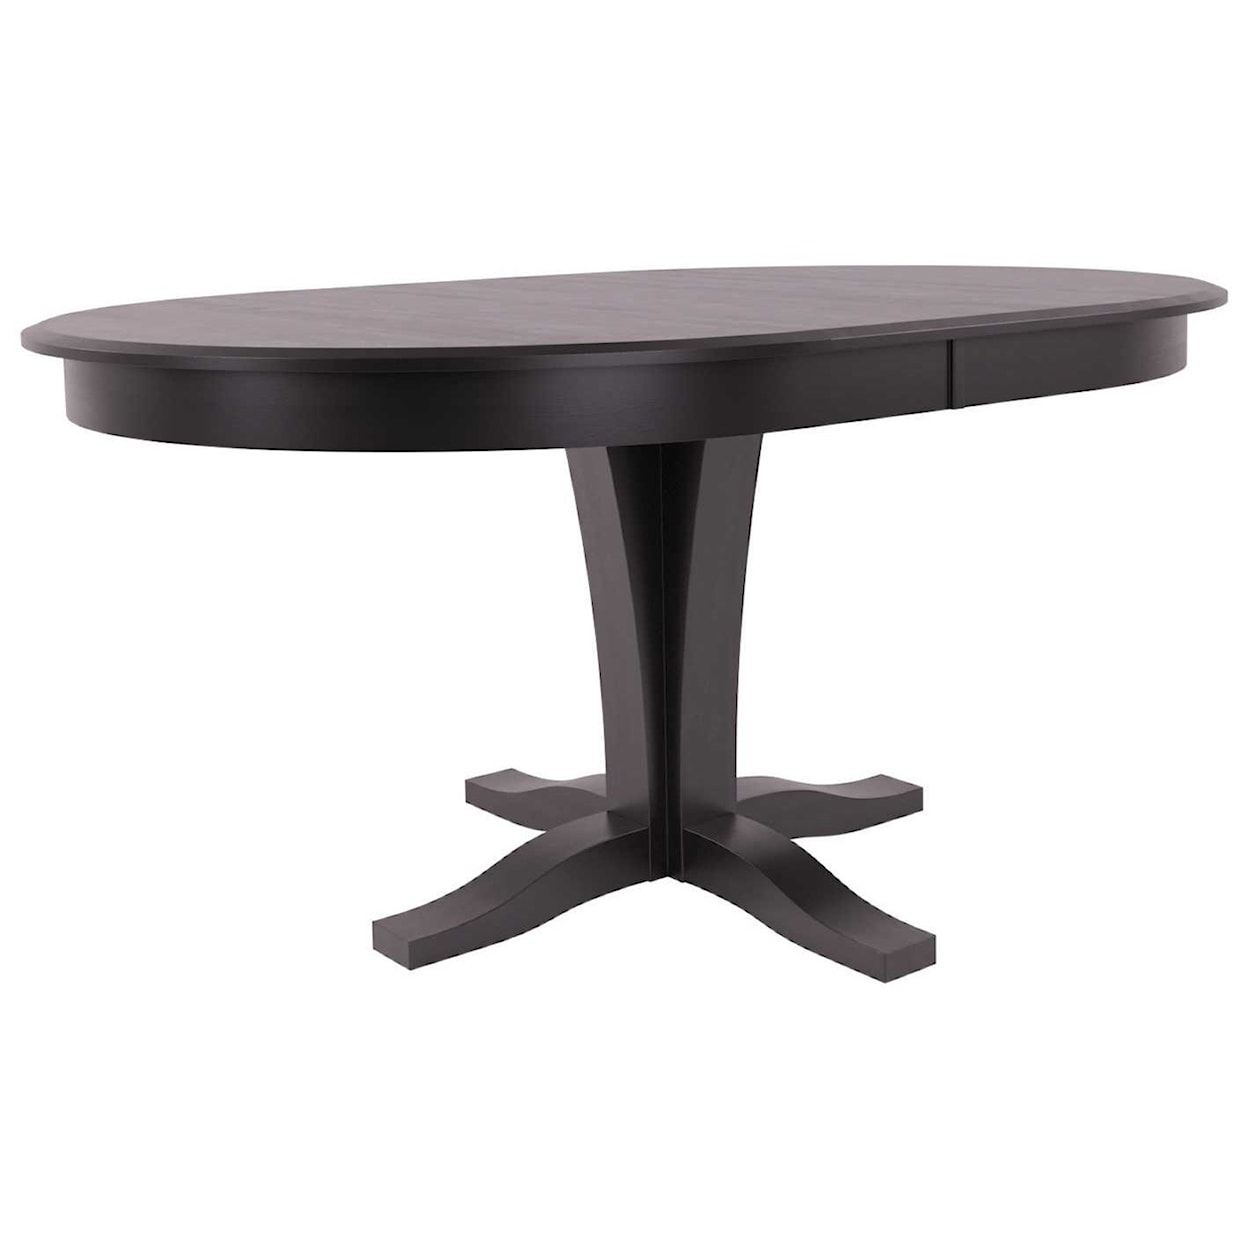 Canadel Gourmet Customizable Oval Table with Pedestal